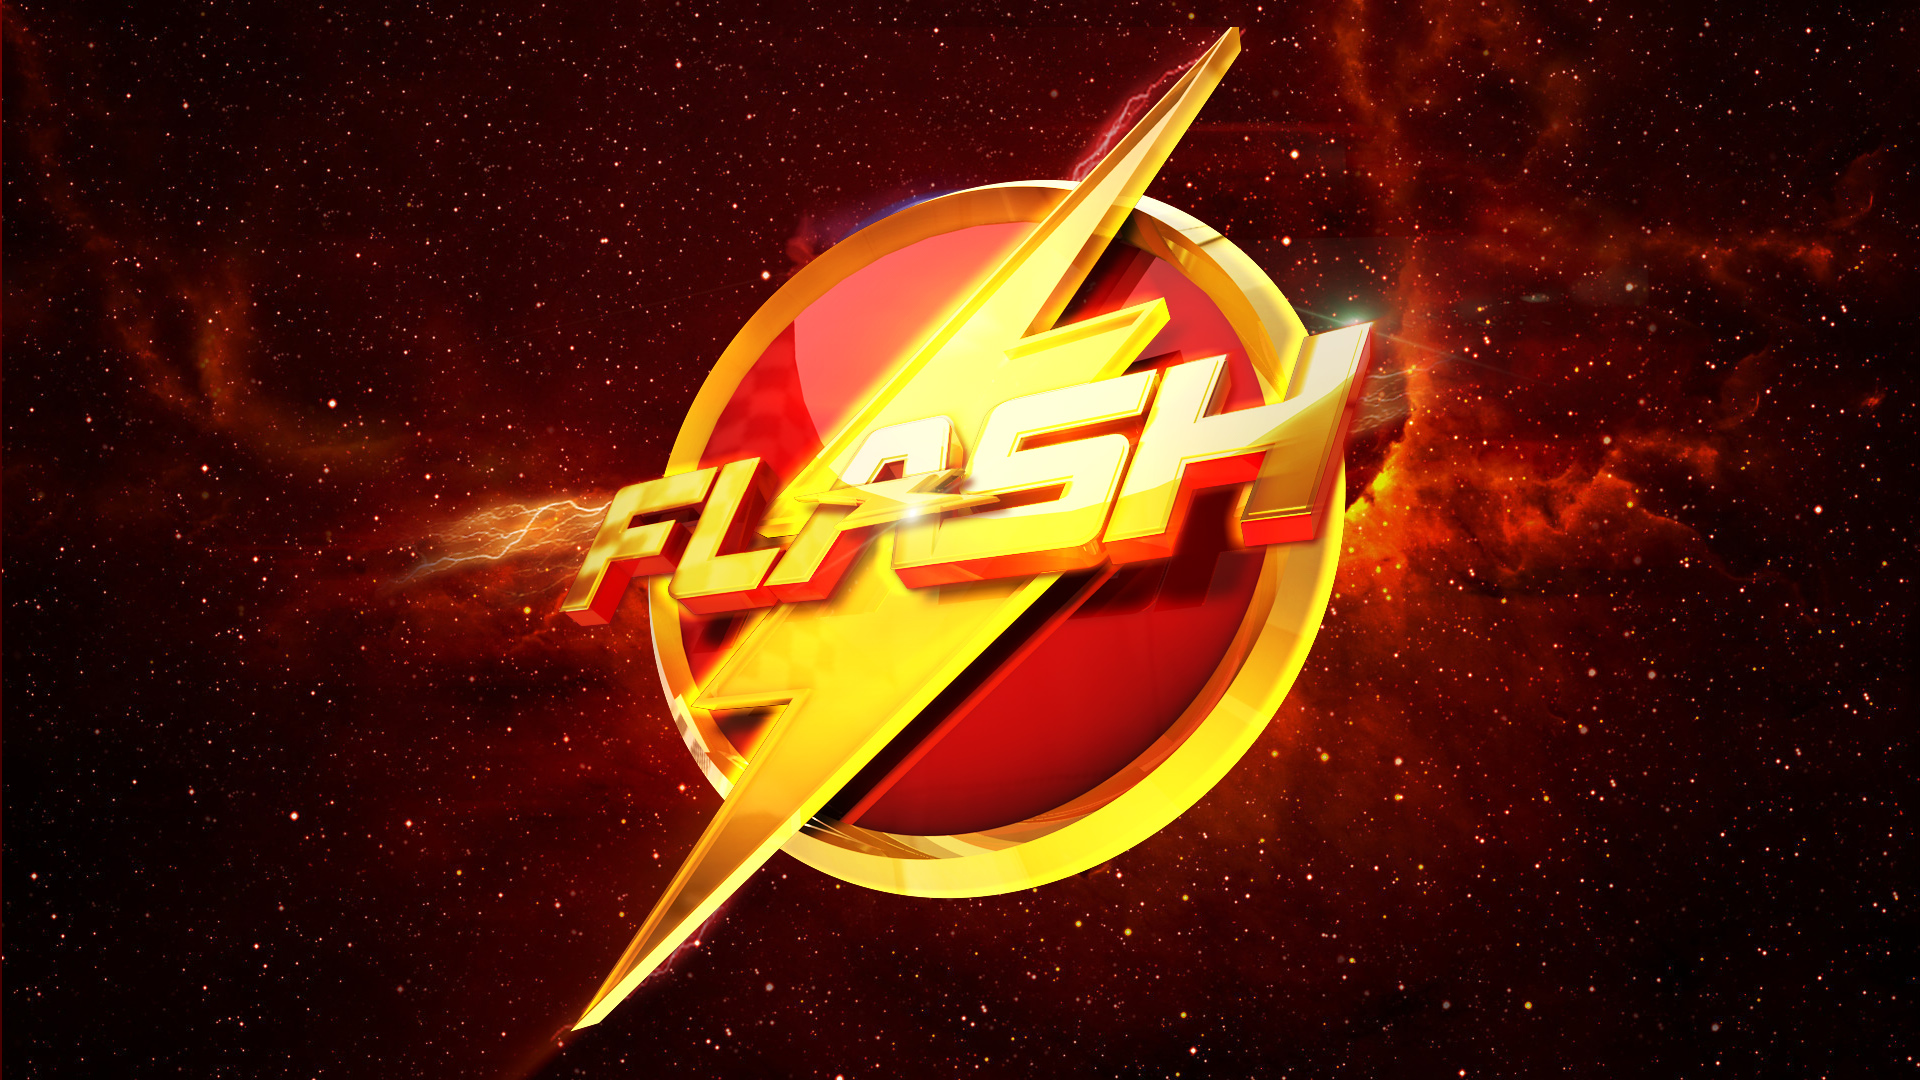 The Flash Cw Wallpaper By Alex4everdn